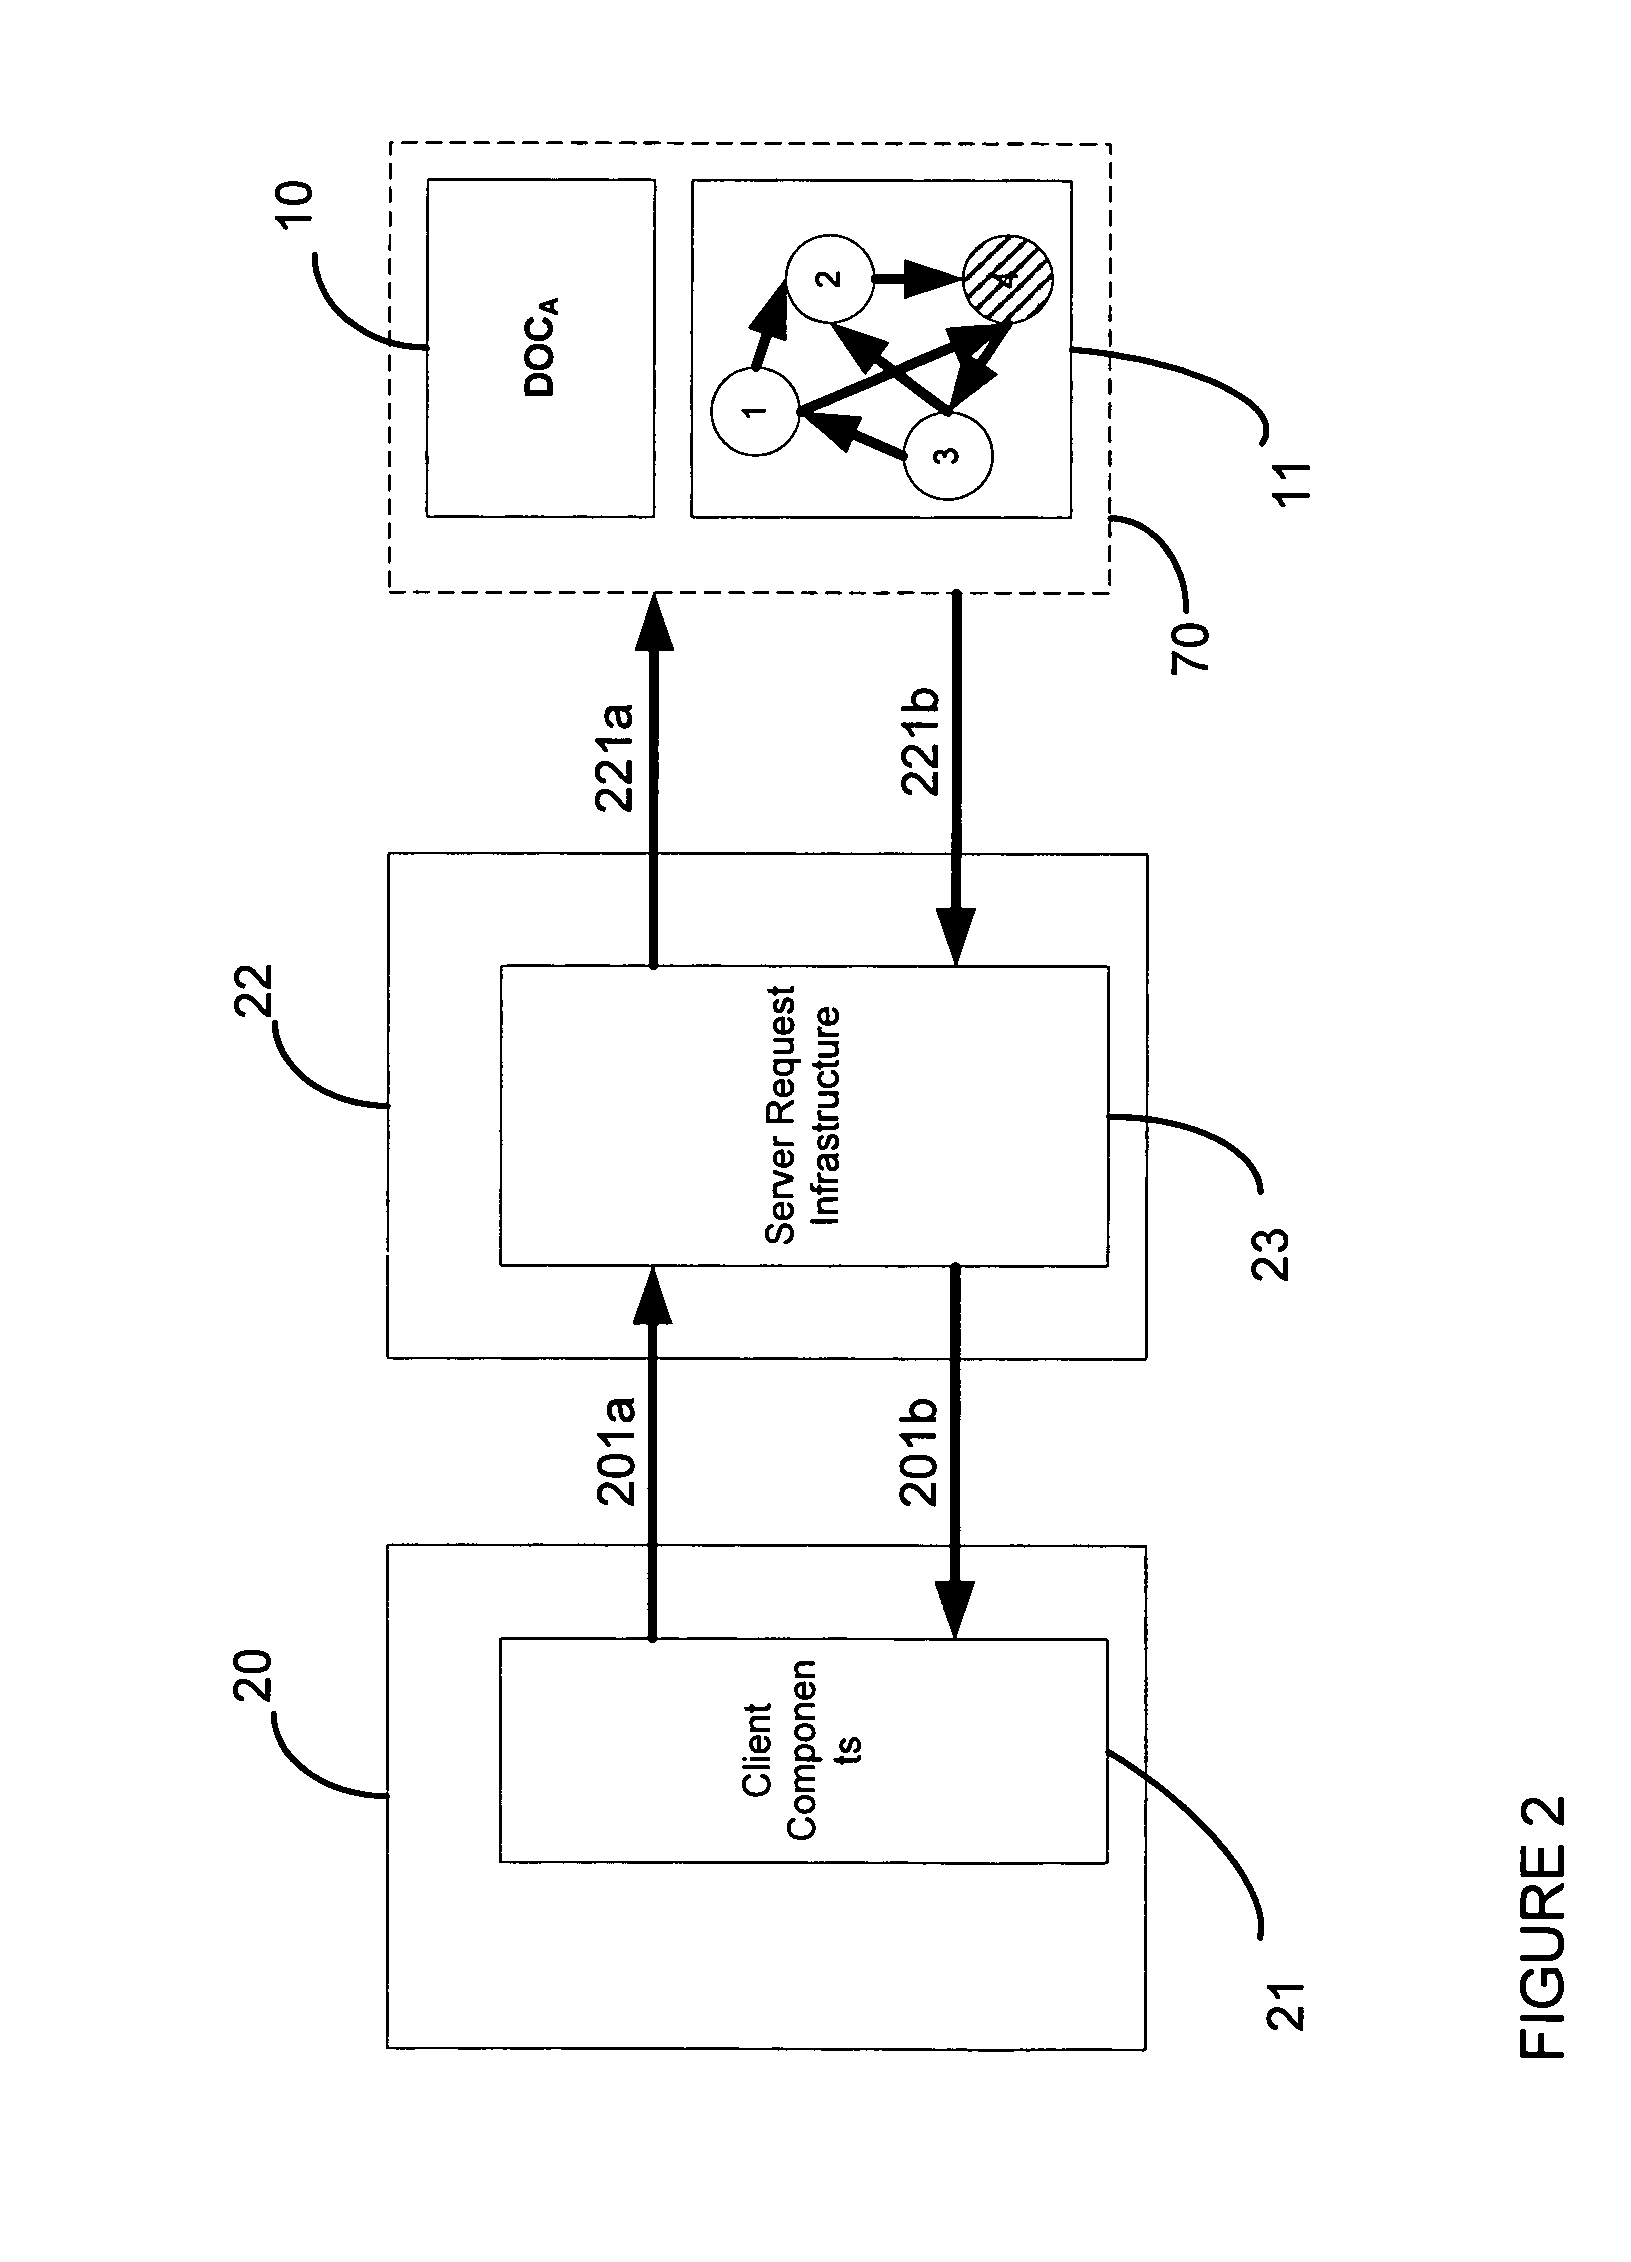 Method for abstract state transitions without requiring state machine knowledge